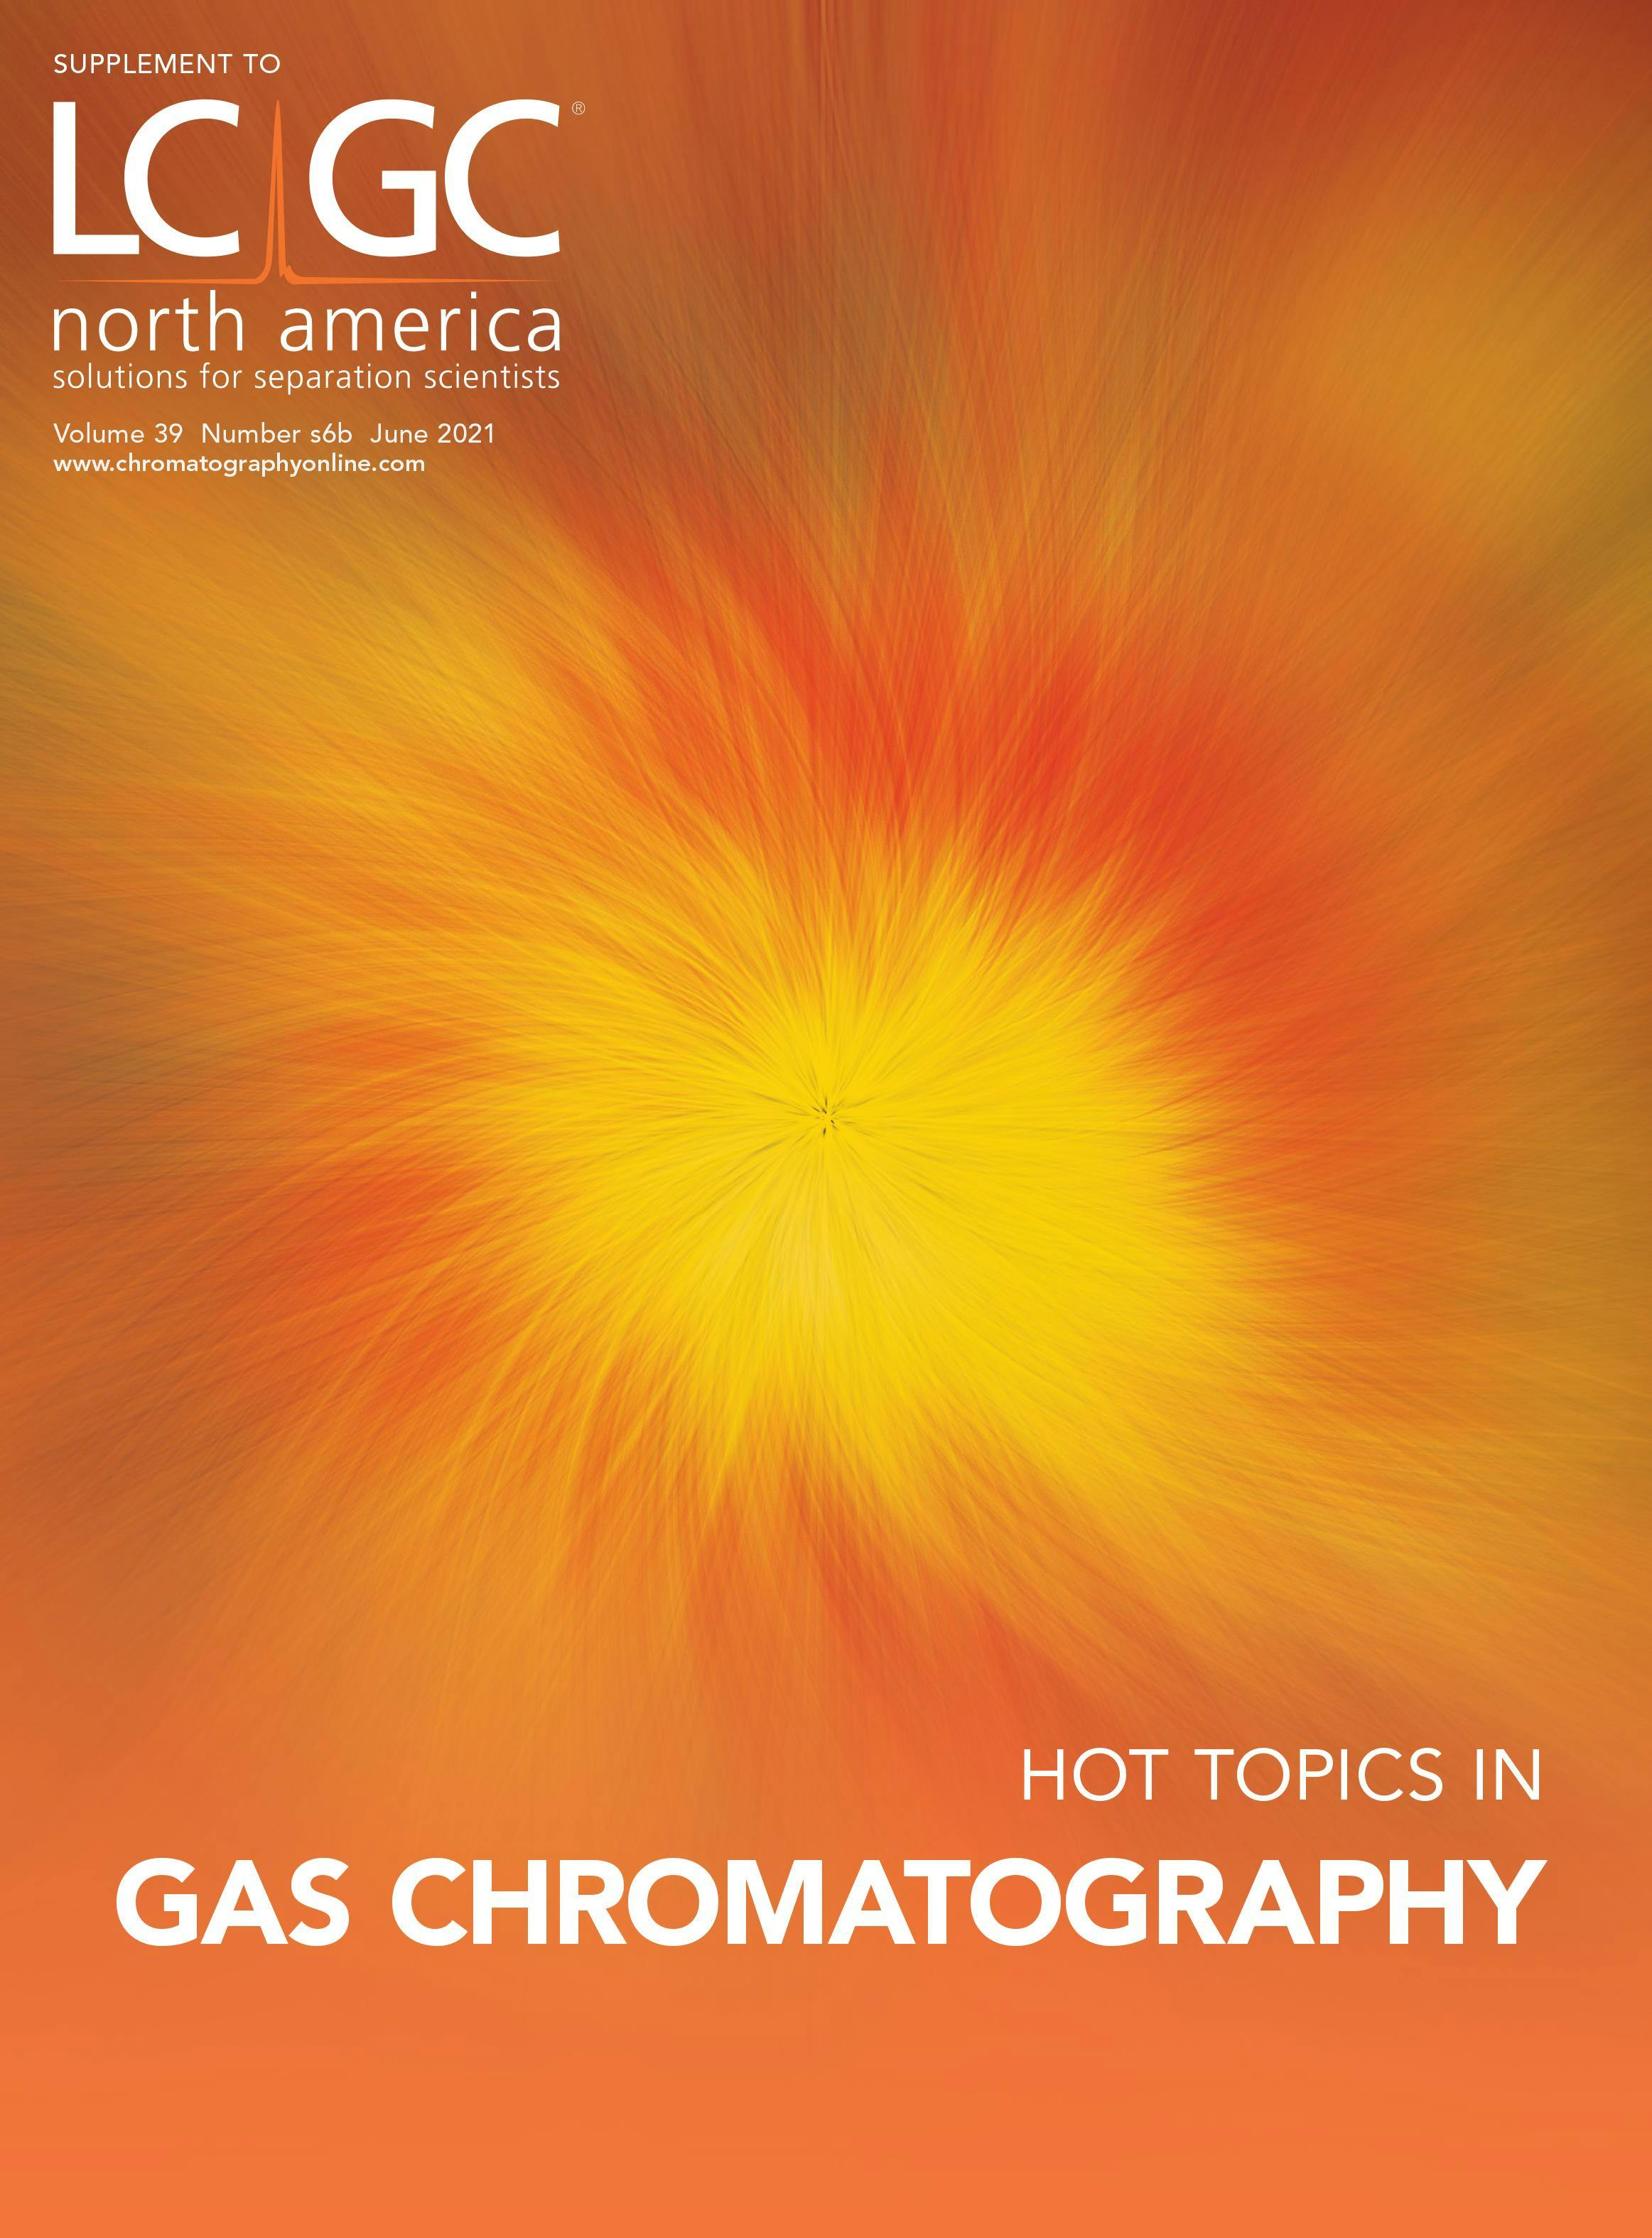 Hot Topics in Gas Chromatography